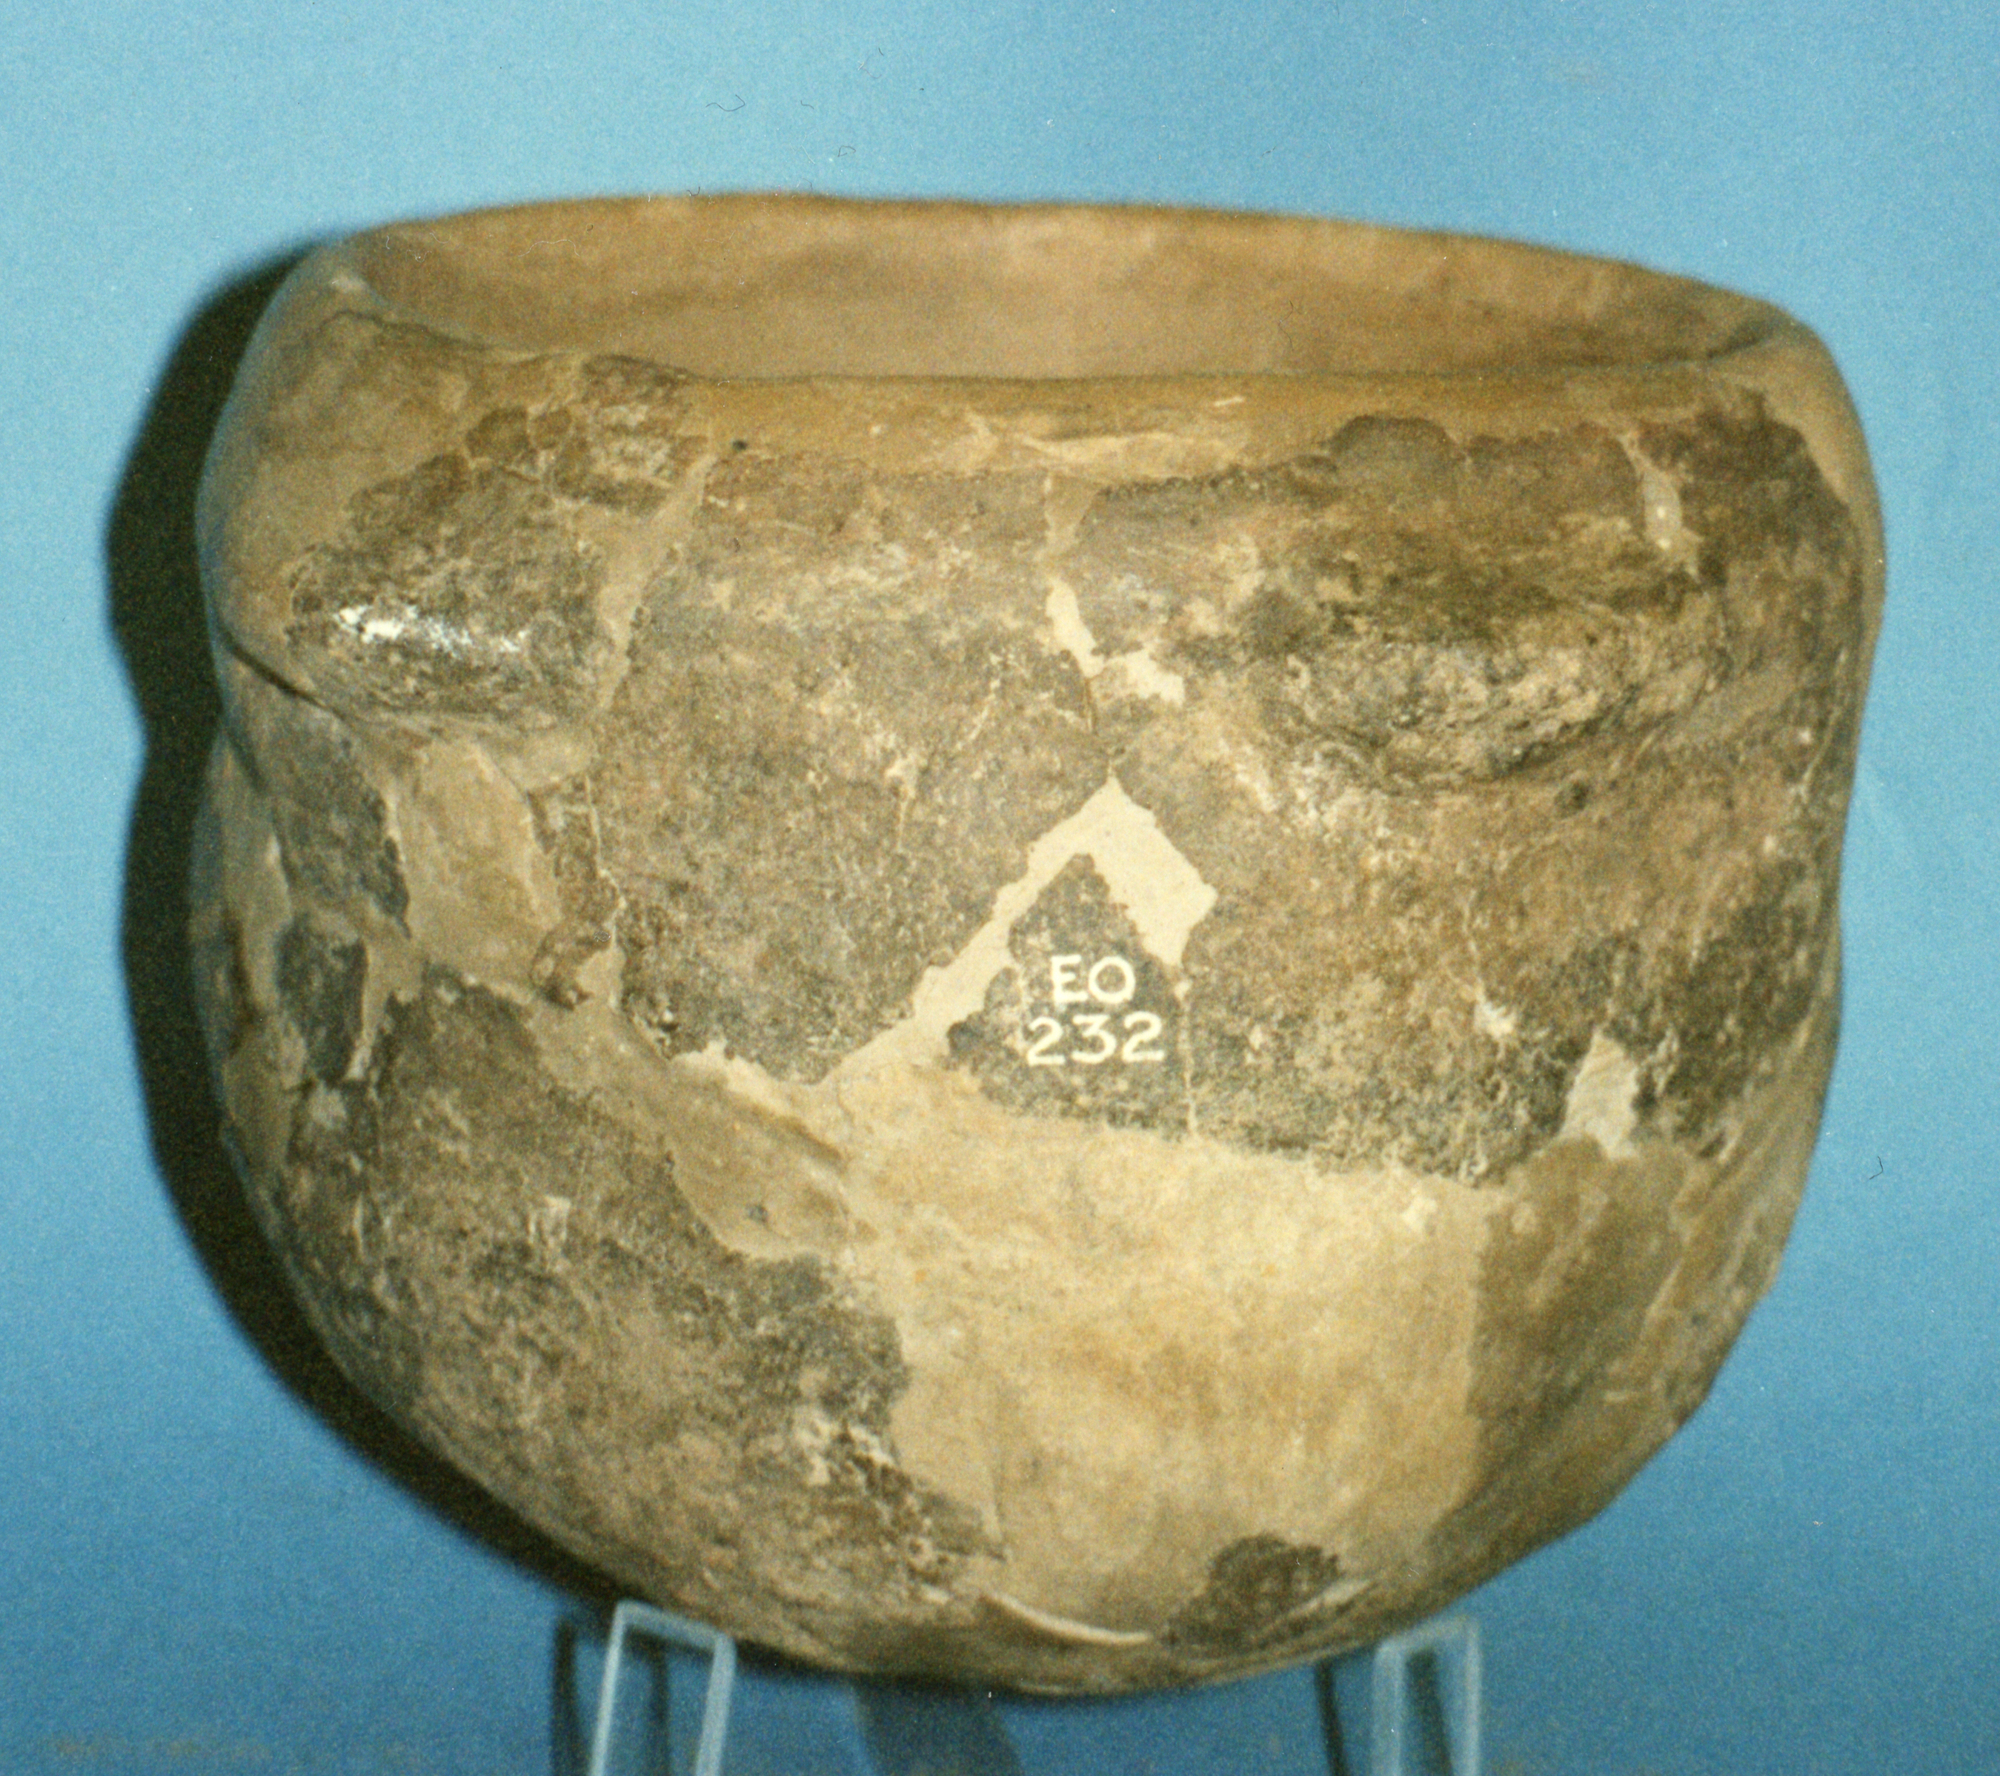 Image of Pottery bowl from Sliddery Cists, Arran, Buteshire © National Museums Scotland